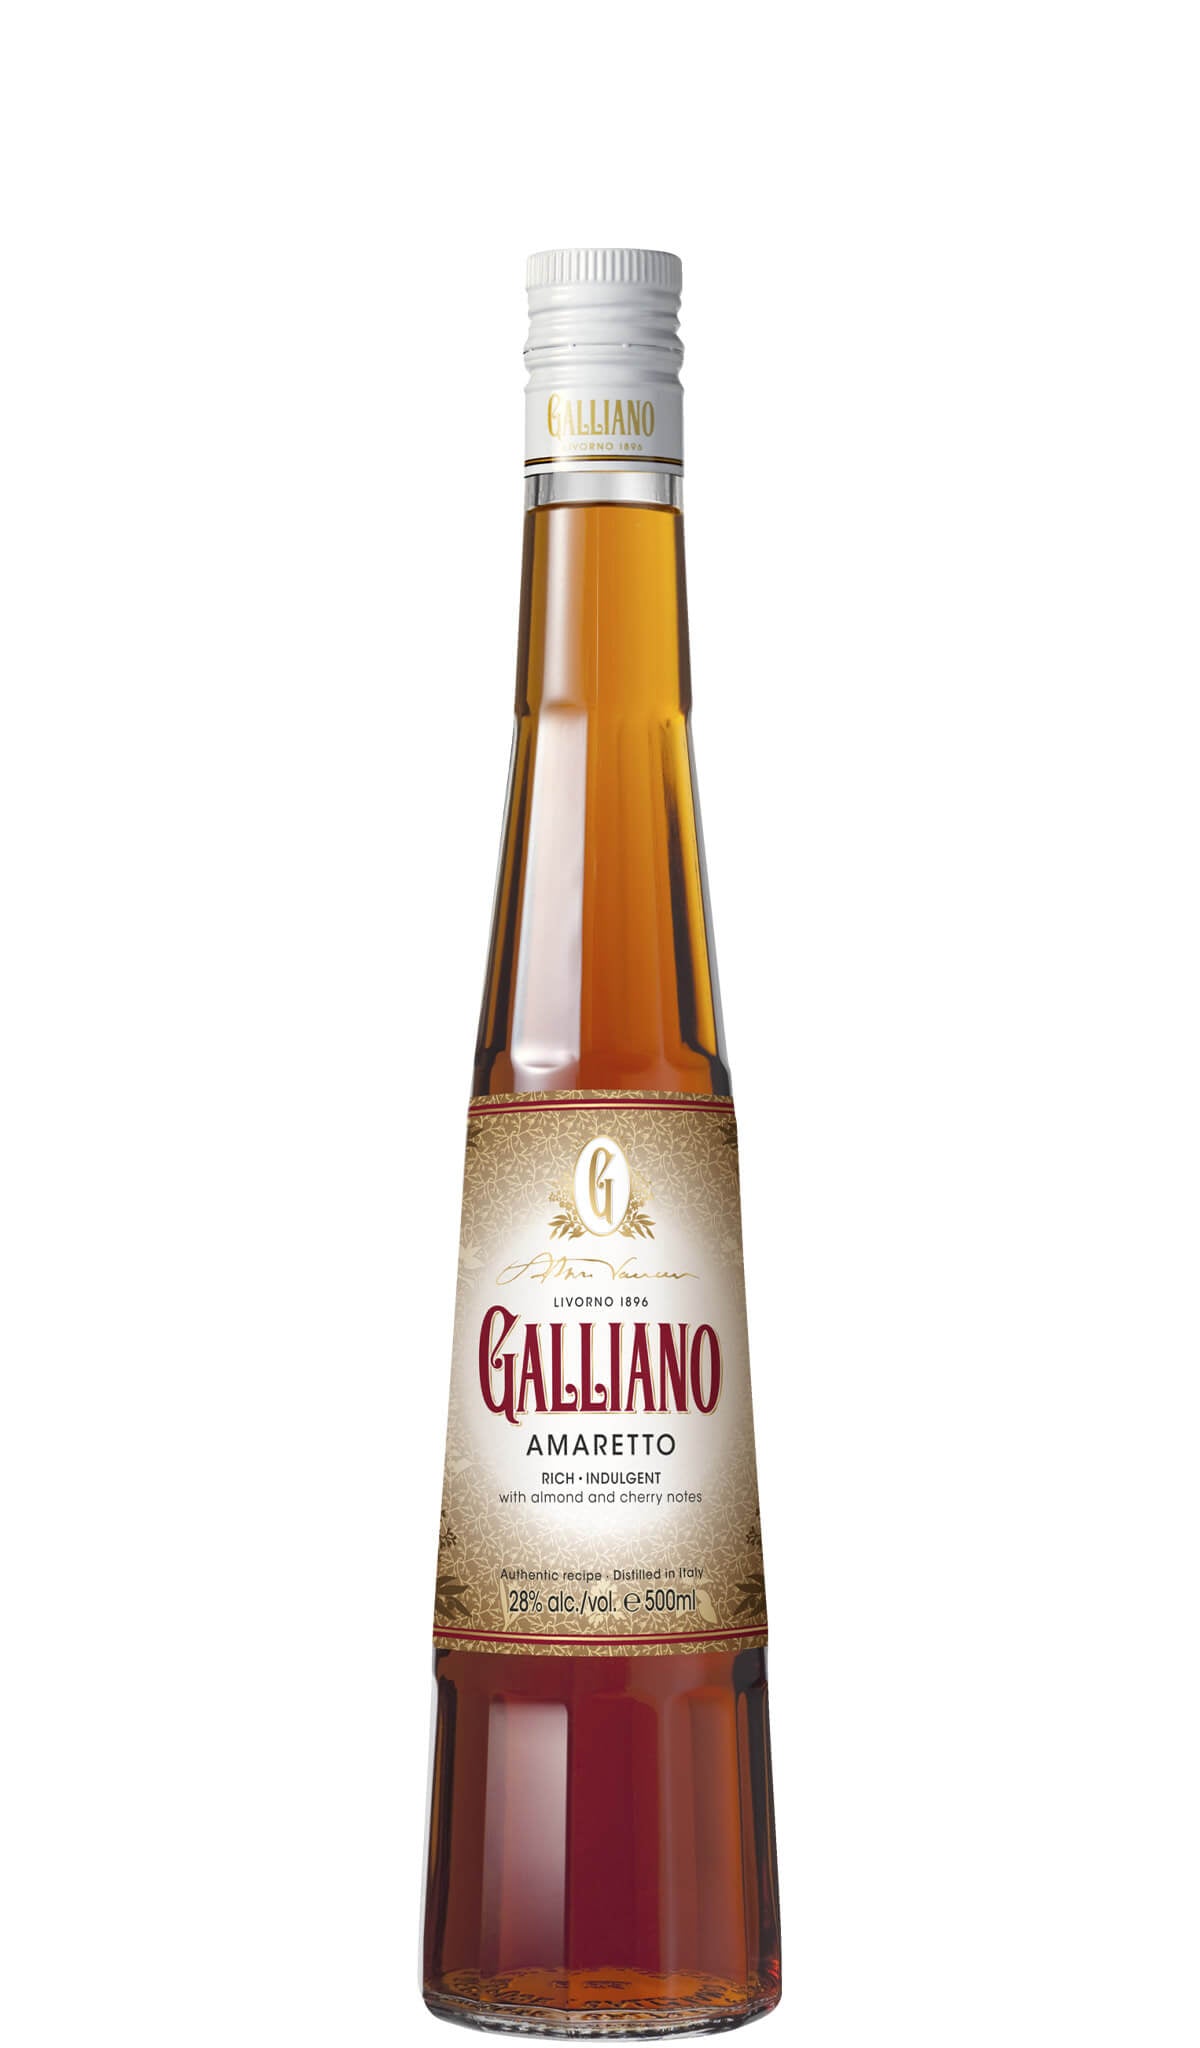 Find out more, explore the range and buy Galliano Amaretto 500mL available online at Wine Sellers Direct - Australia's independent liquor specialists.